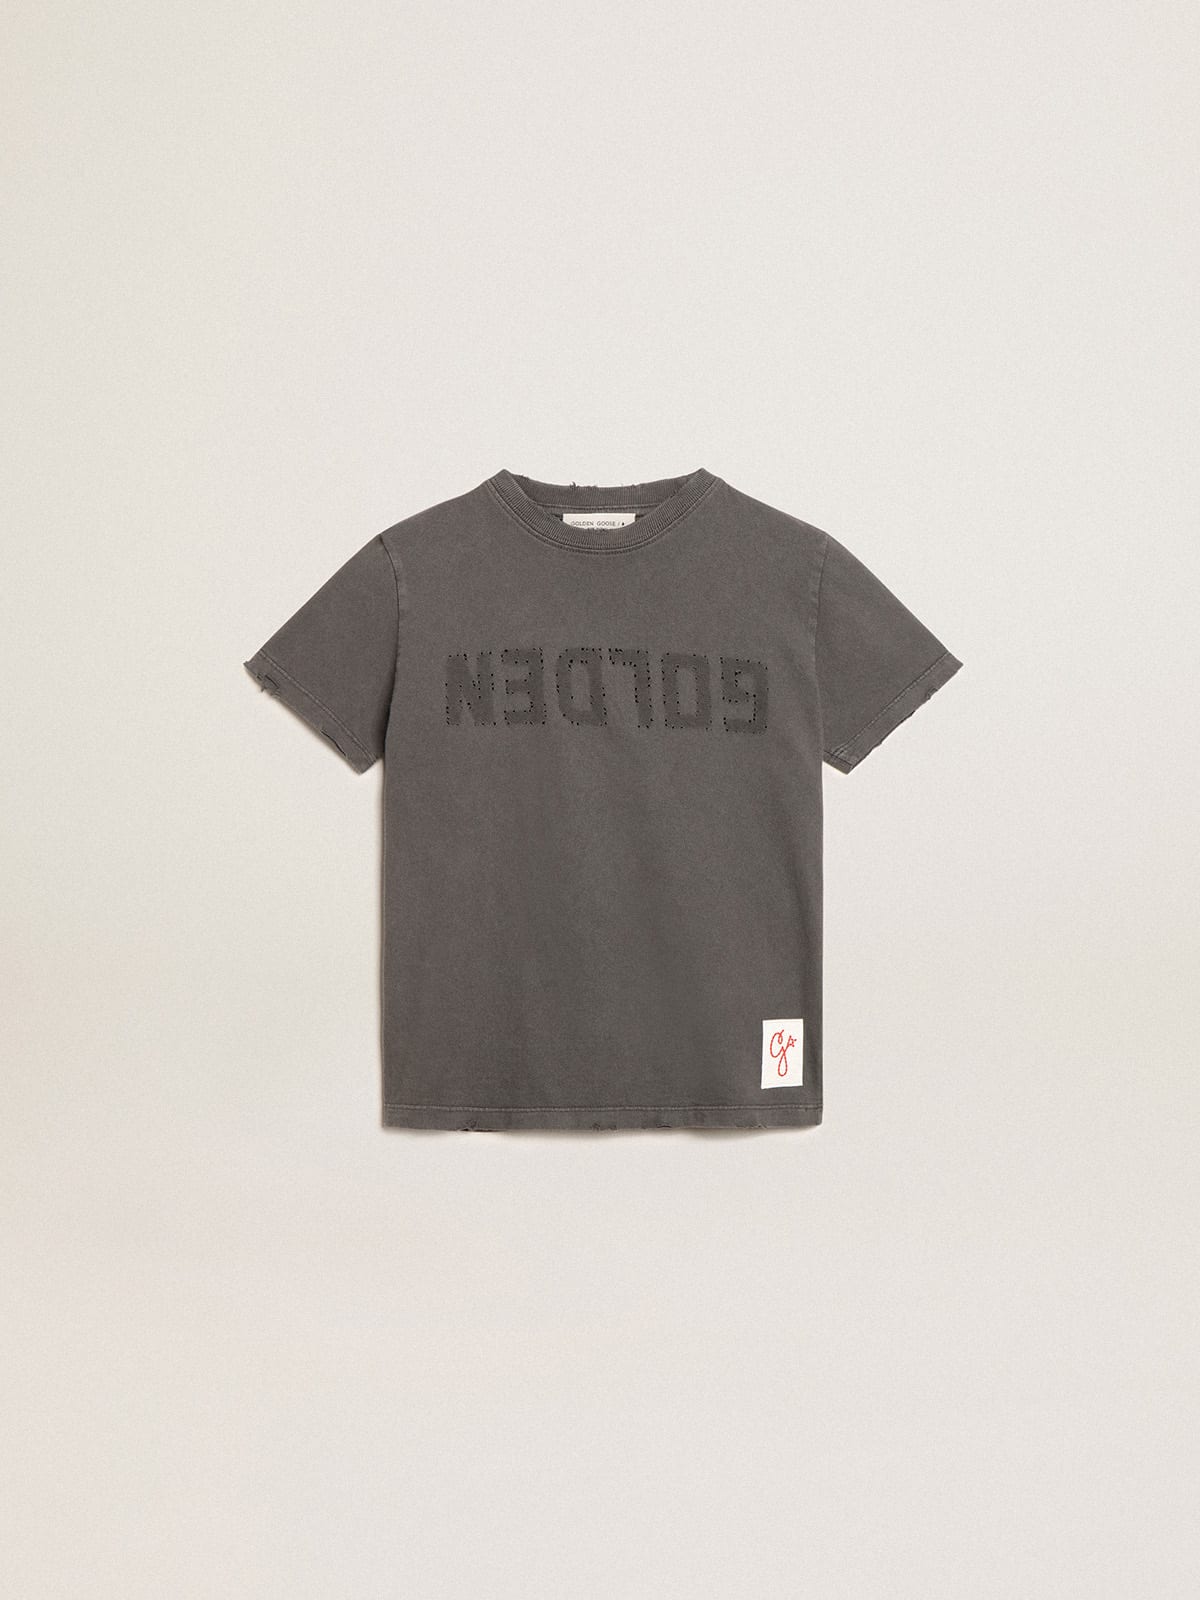 Boys' T-shirt in gray with distressed treatment